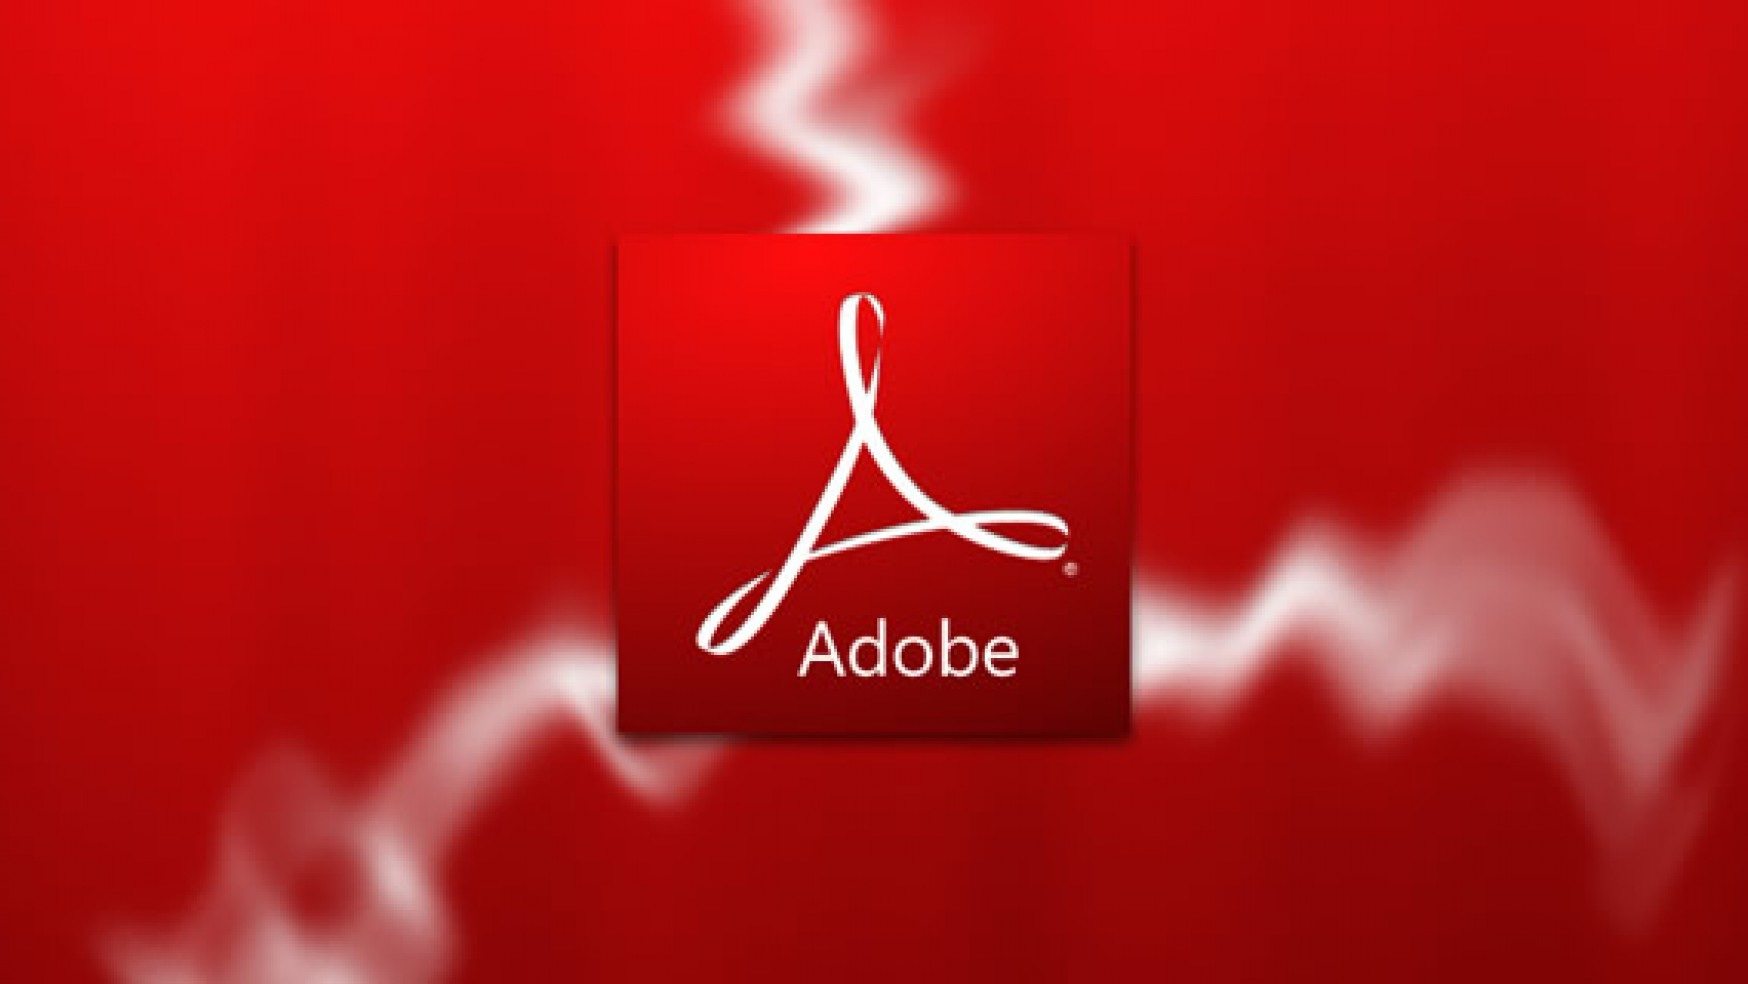 Download Adobe Flash Player For Chrome Mac